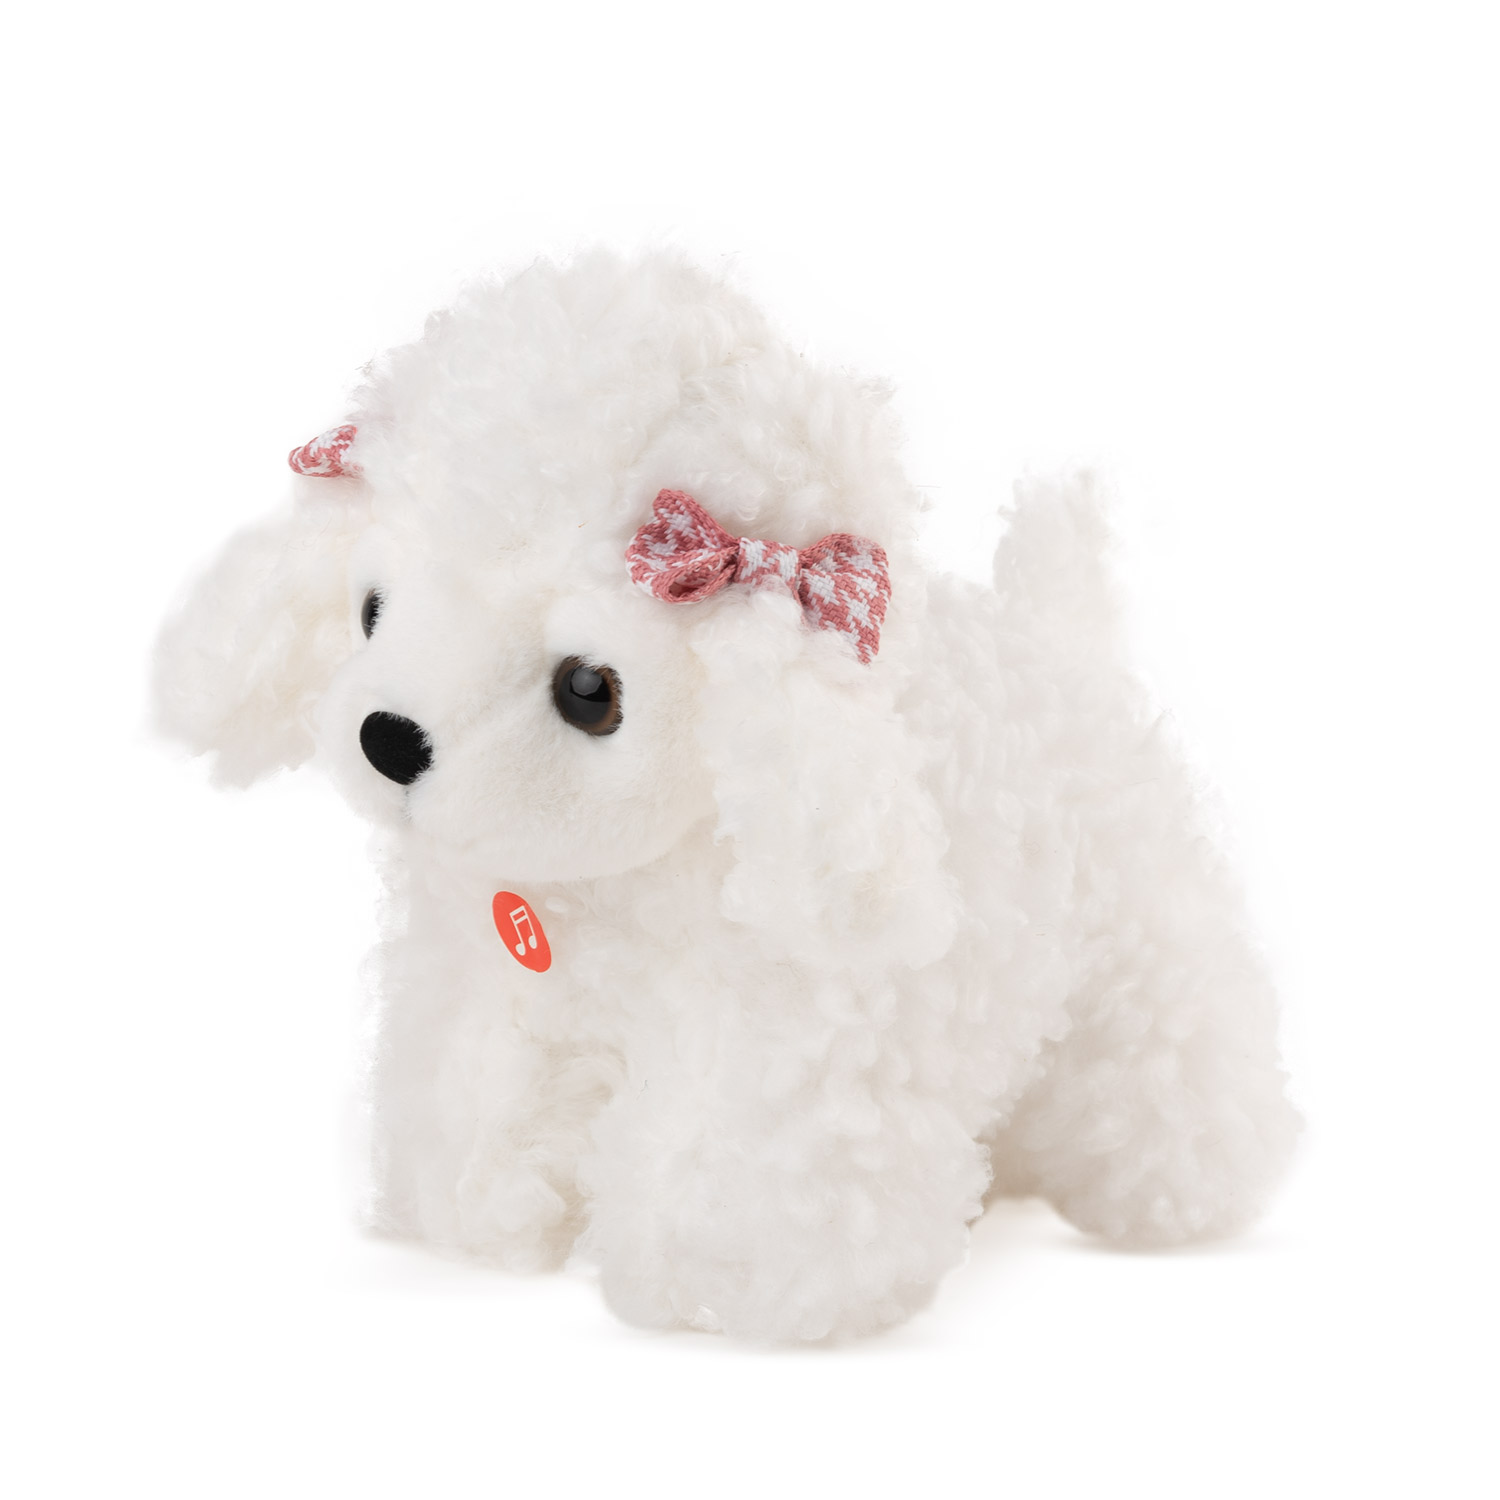 Poodle with sound - White